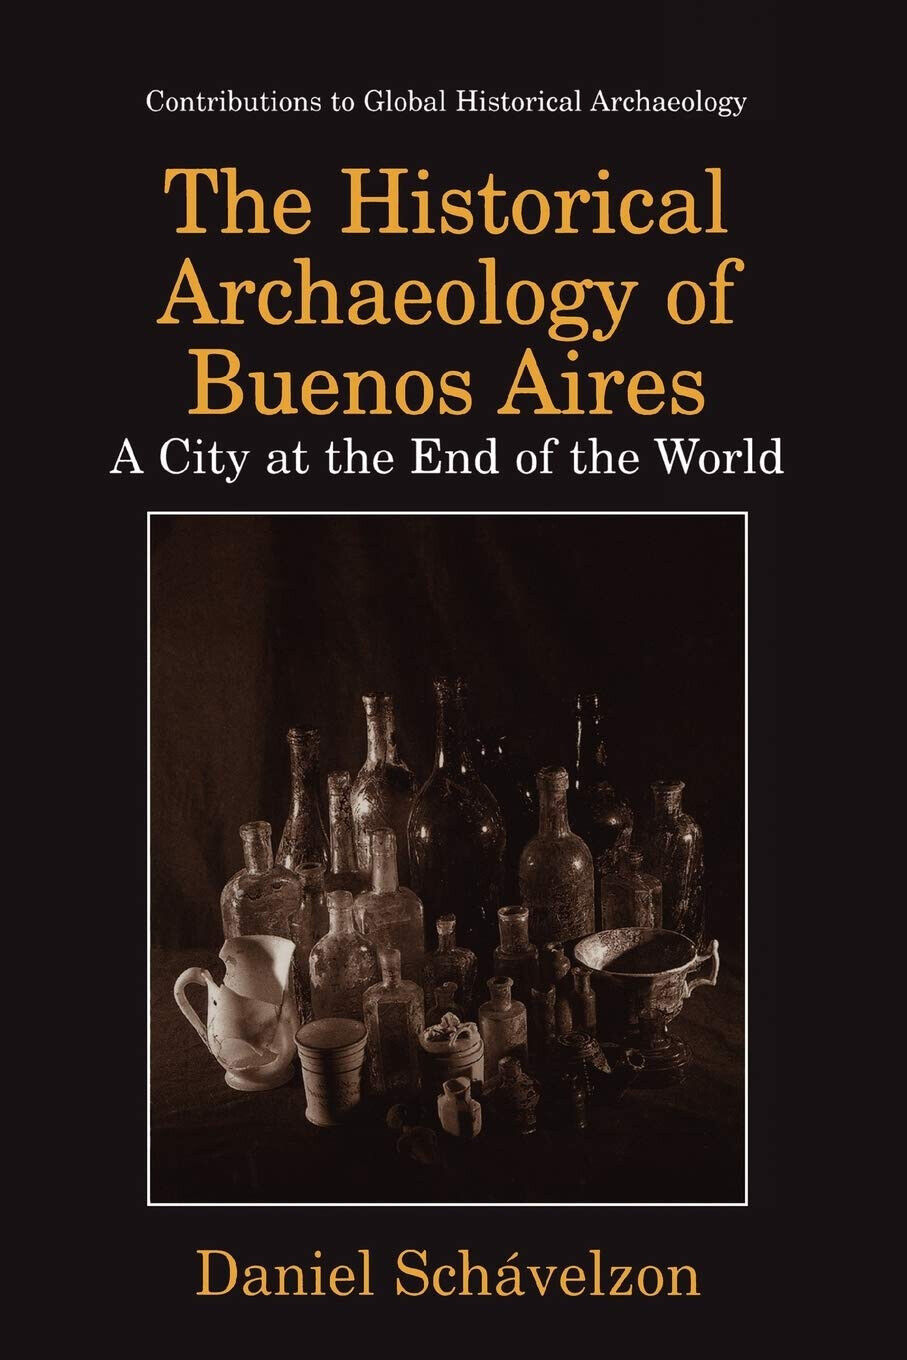 The Historical Archaeology of Buenos Aires - Daniel Sch?velzon - Palgrave, 2010